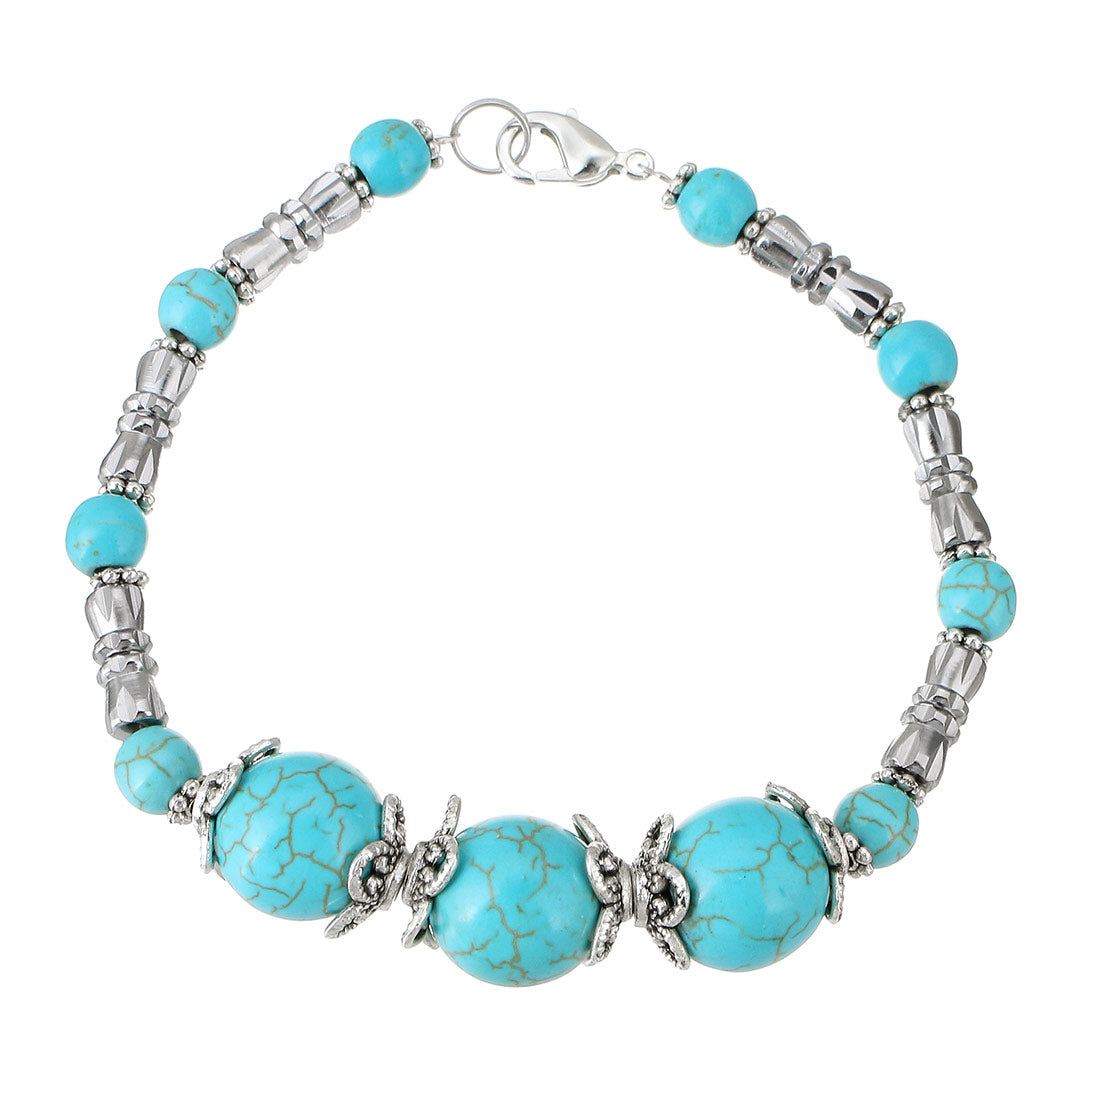 Turquoise Howlite Bracelet - Brass Silver Color Plated - 8 inch - China - NEW922